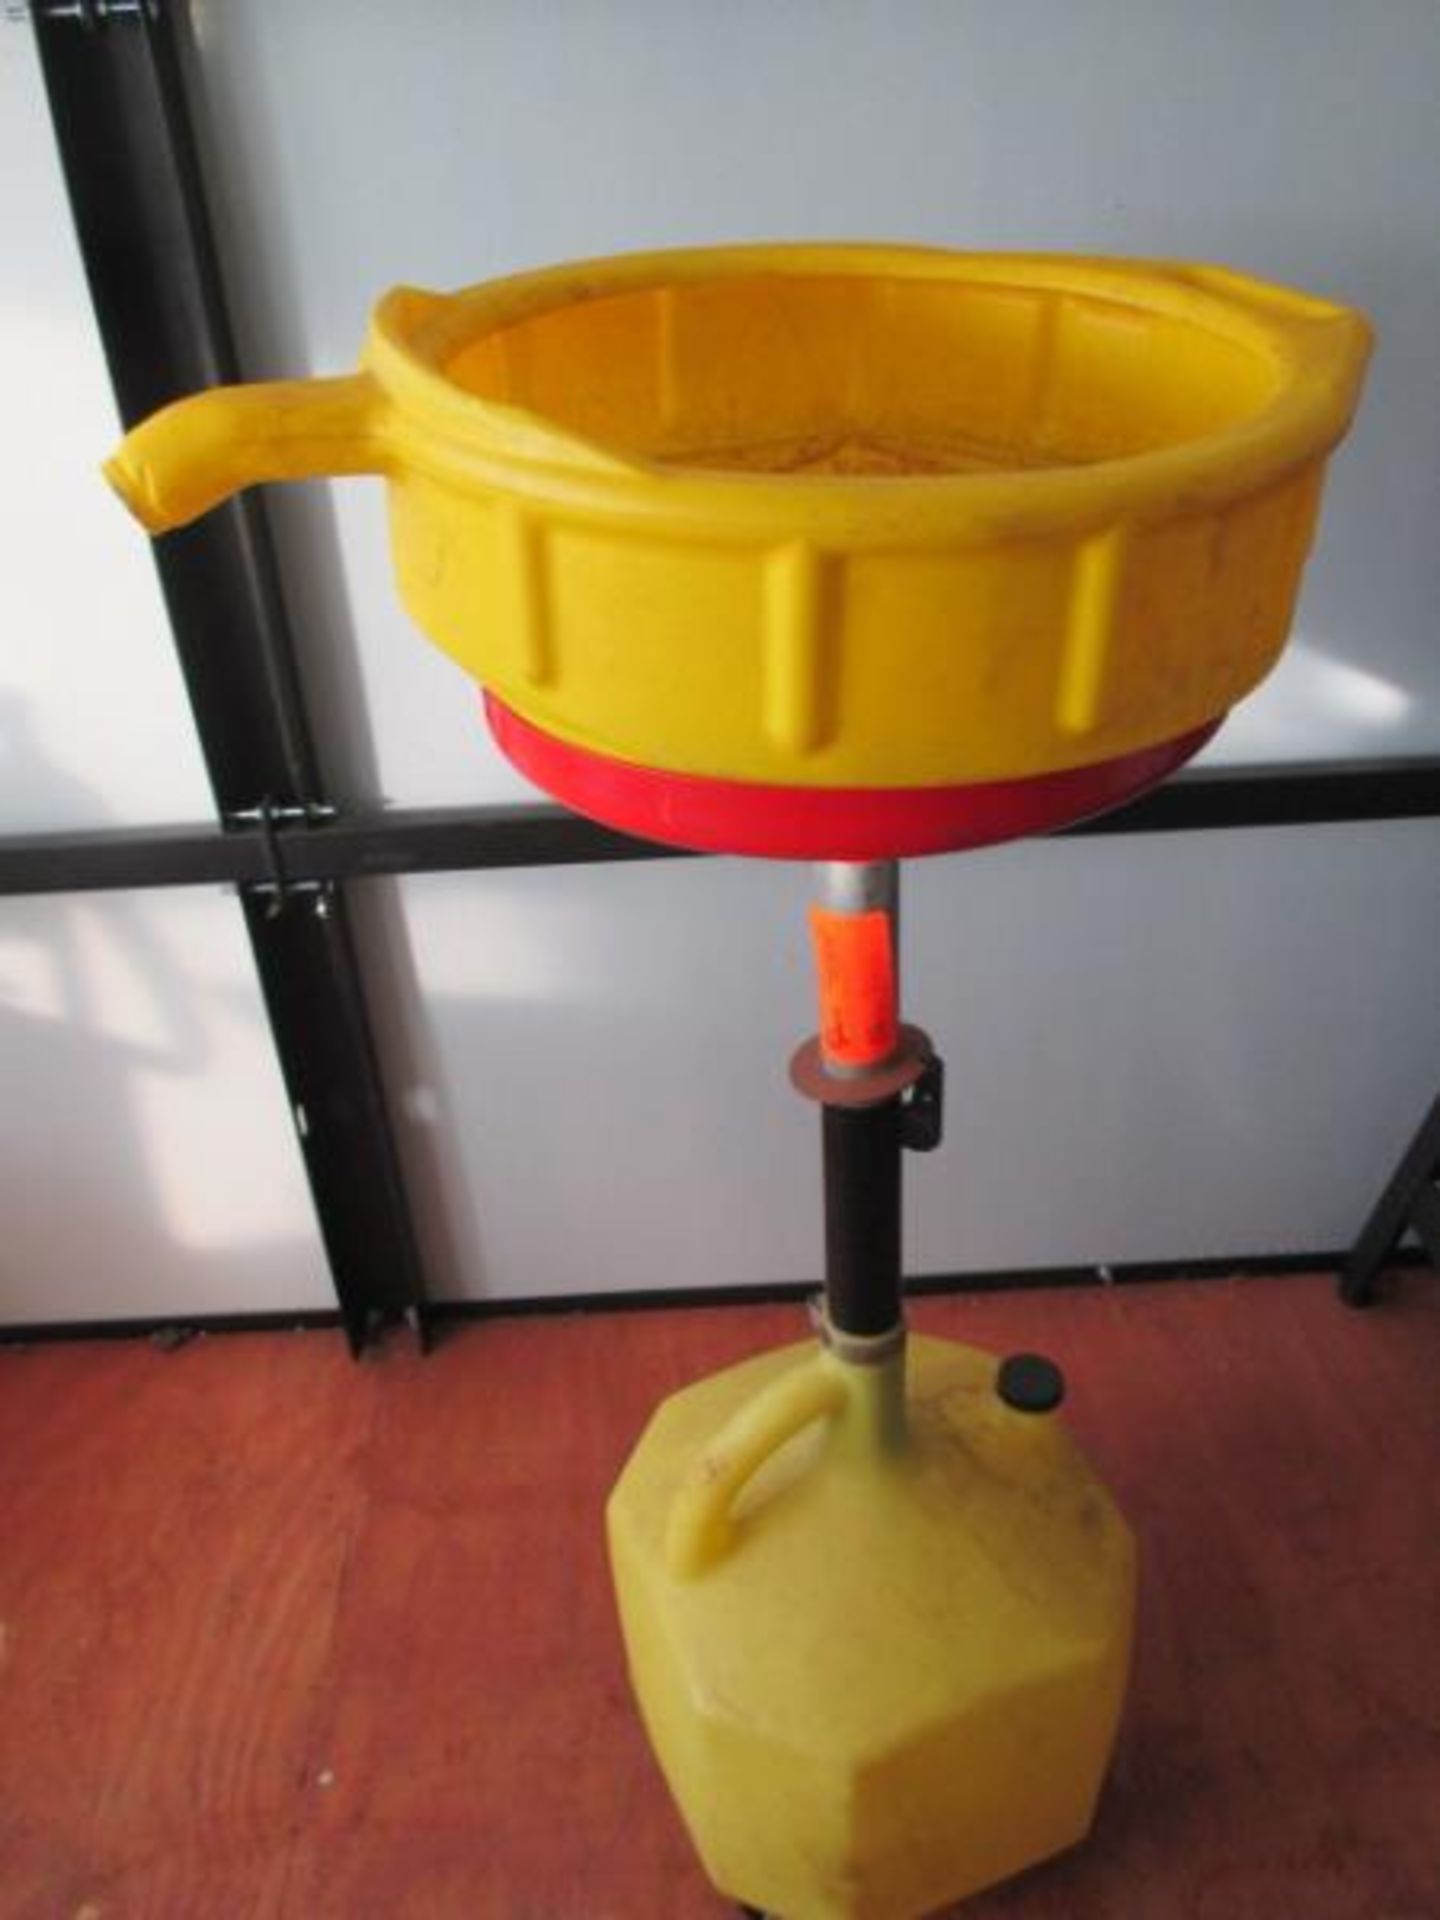 Direct Catch Oil Drainers w/ Yellow Tank on Casters, Adjustable Height Casters, Adjustable Height